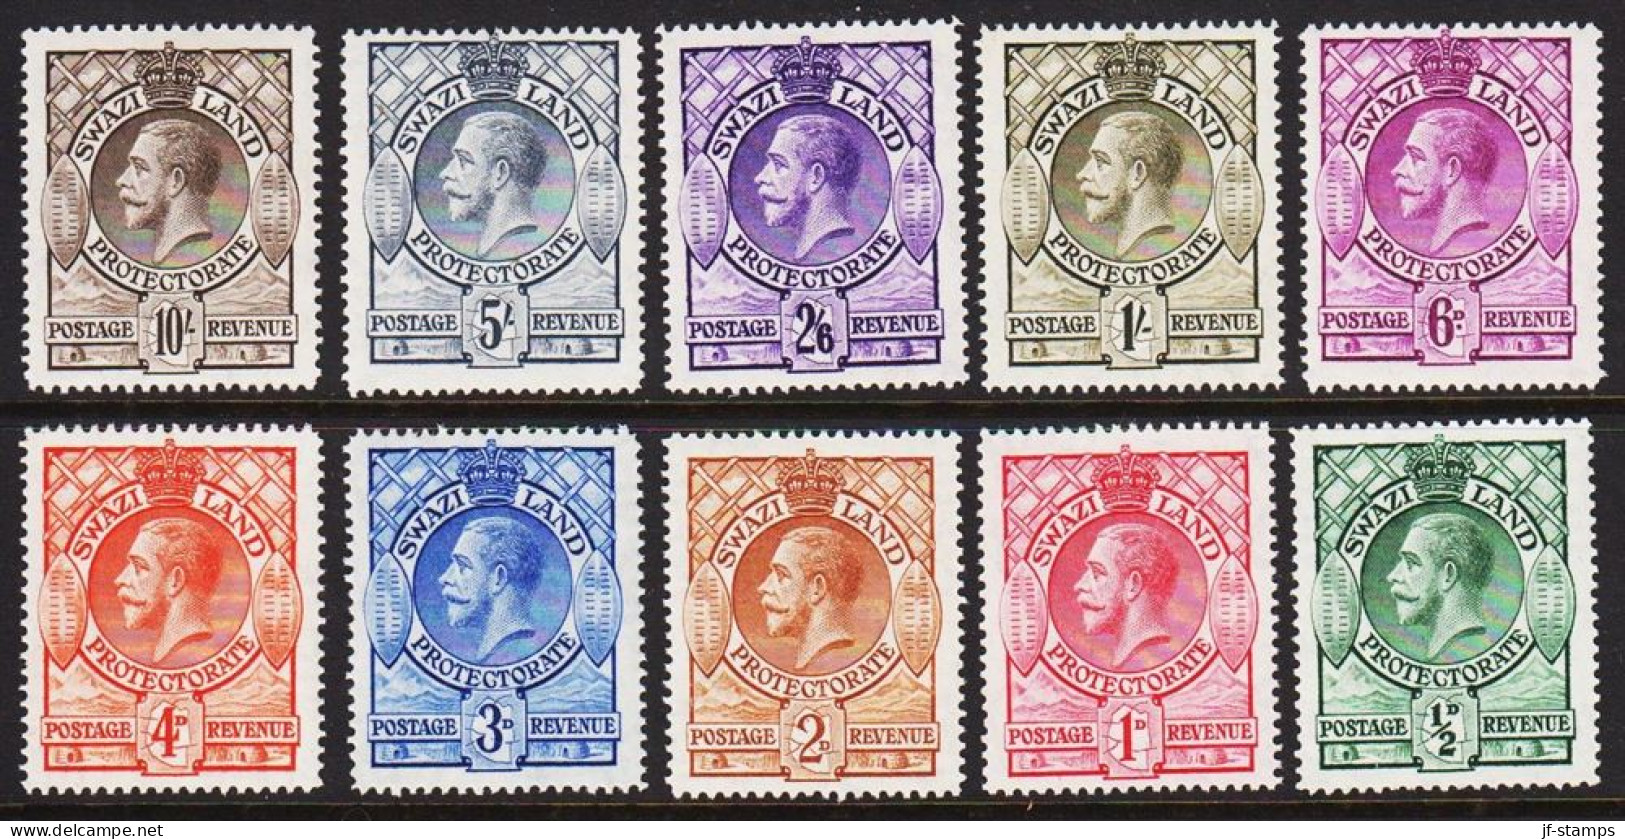 1933. SWAZILAND. Georg V Complete Set With 10 Beautiful Very Light Hinged Stamps. Excellent... (MICHEL 10-19) - JF540764 - Swaziland (...-1967)